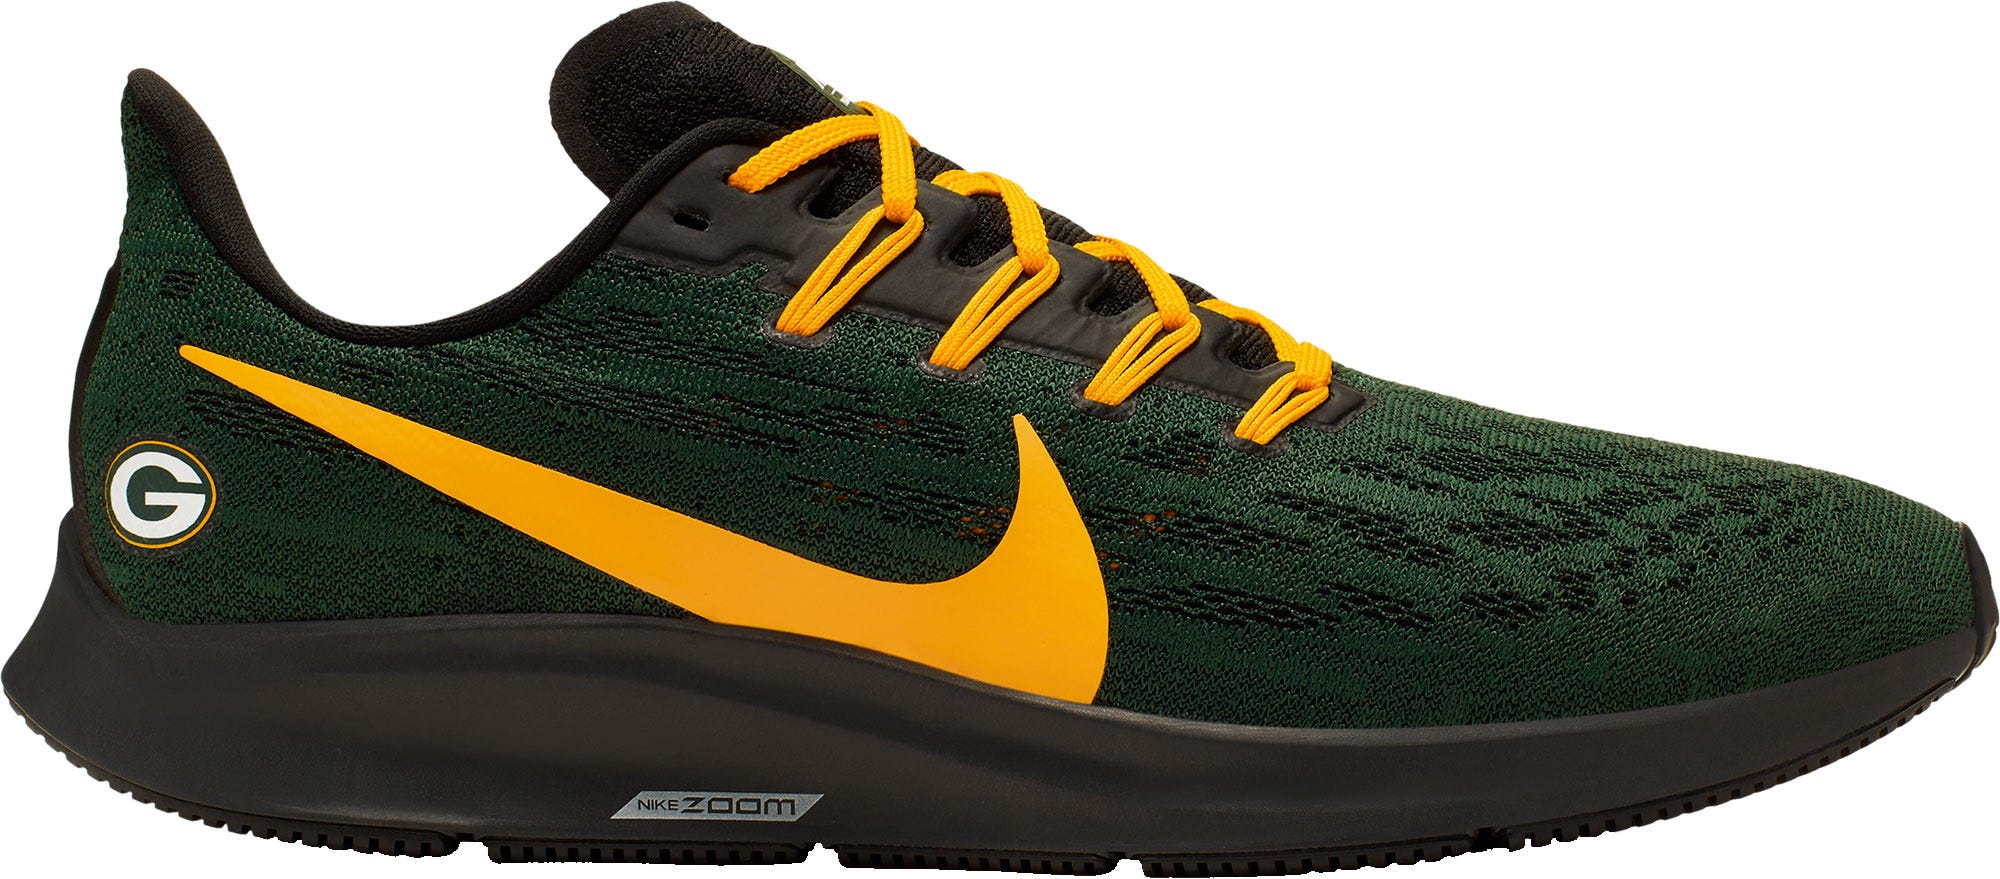 Packers getting their own Nike shoe